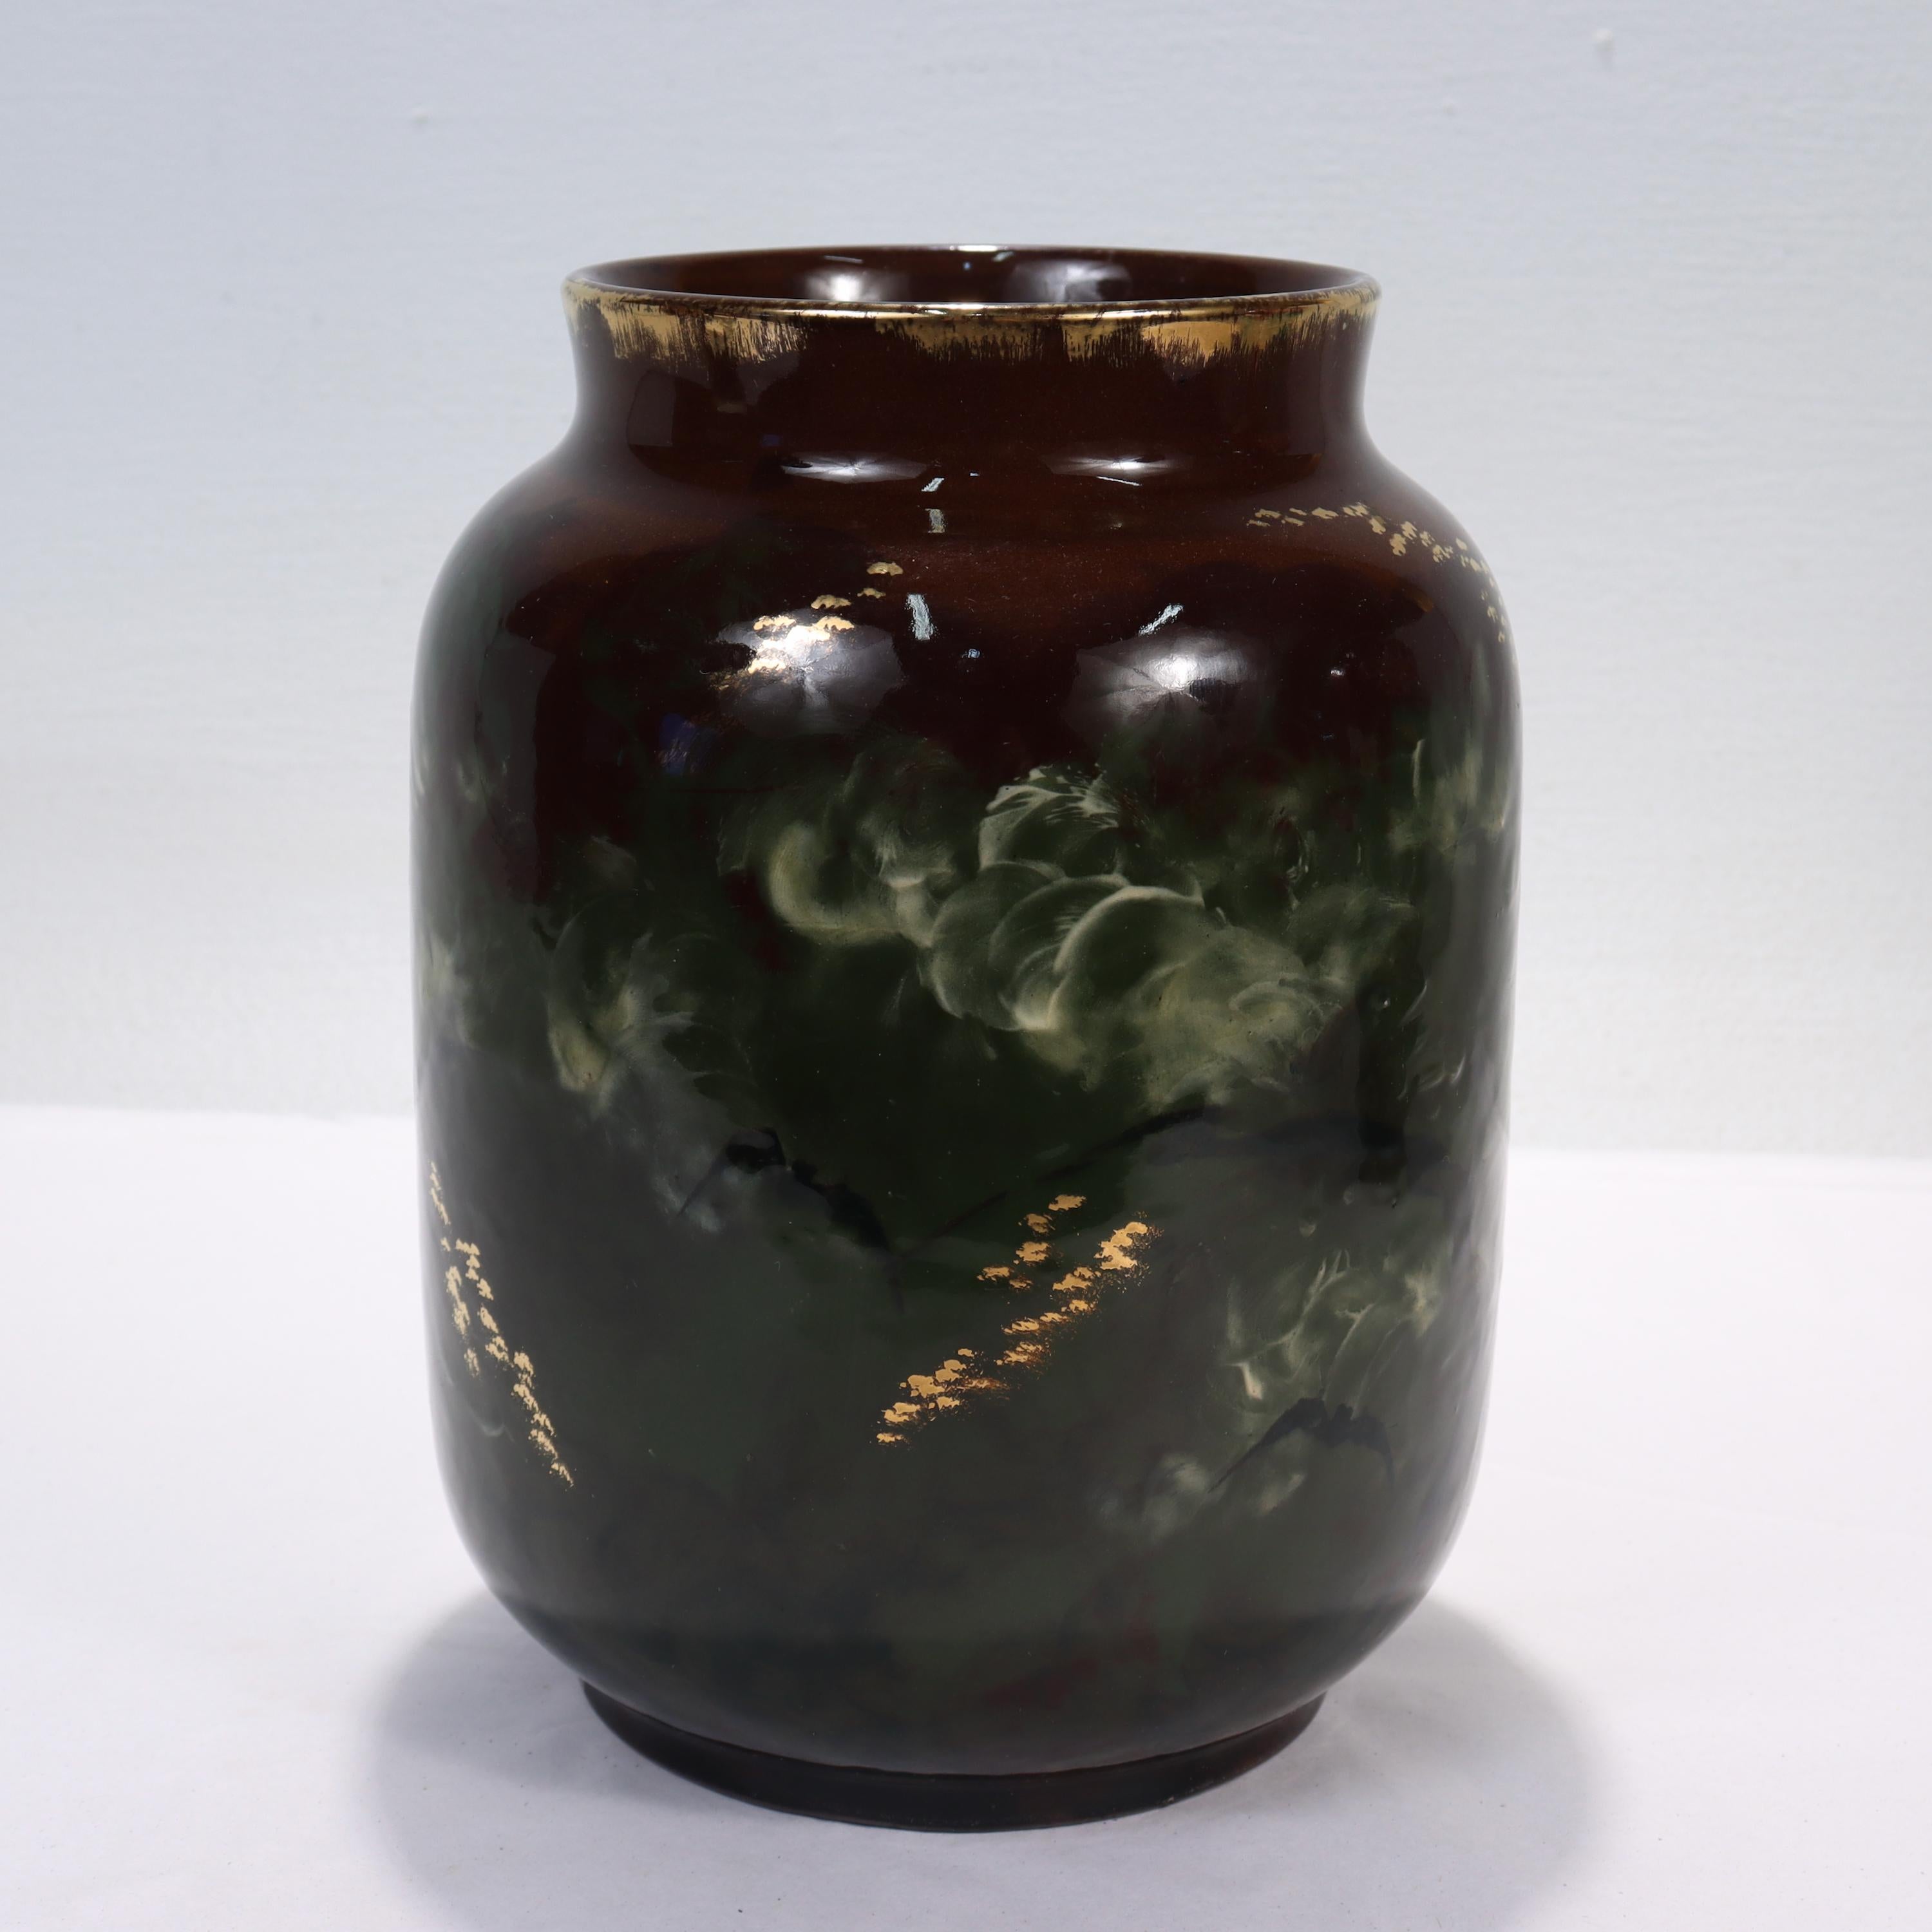 American Rookwood Limoges Glazed Vase by Albert Valentin with Bats, Moon, & Spider, 1882